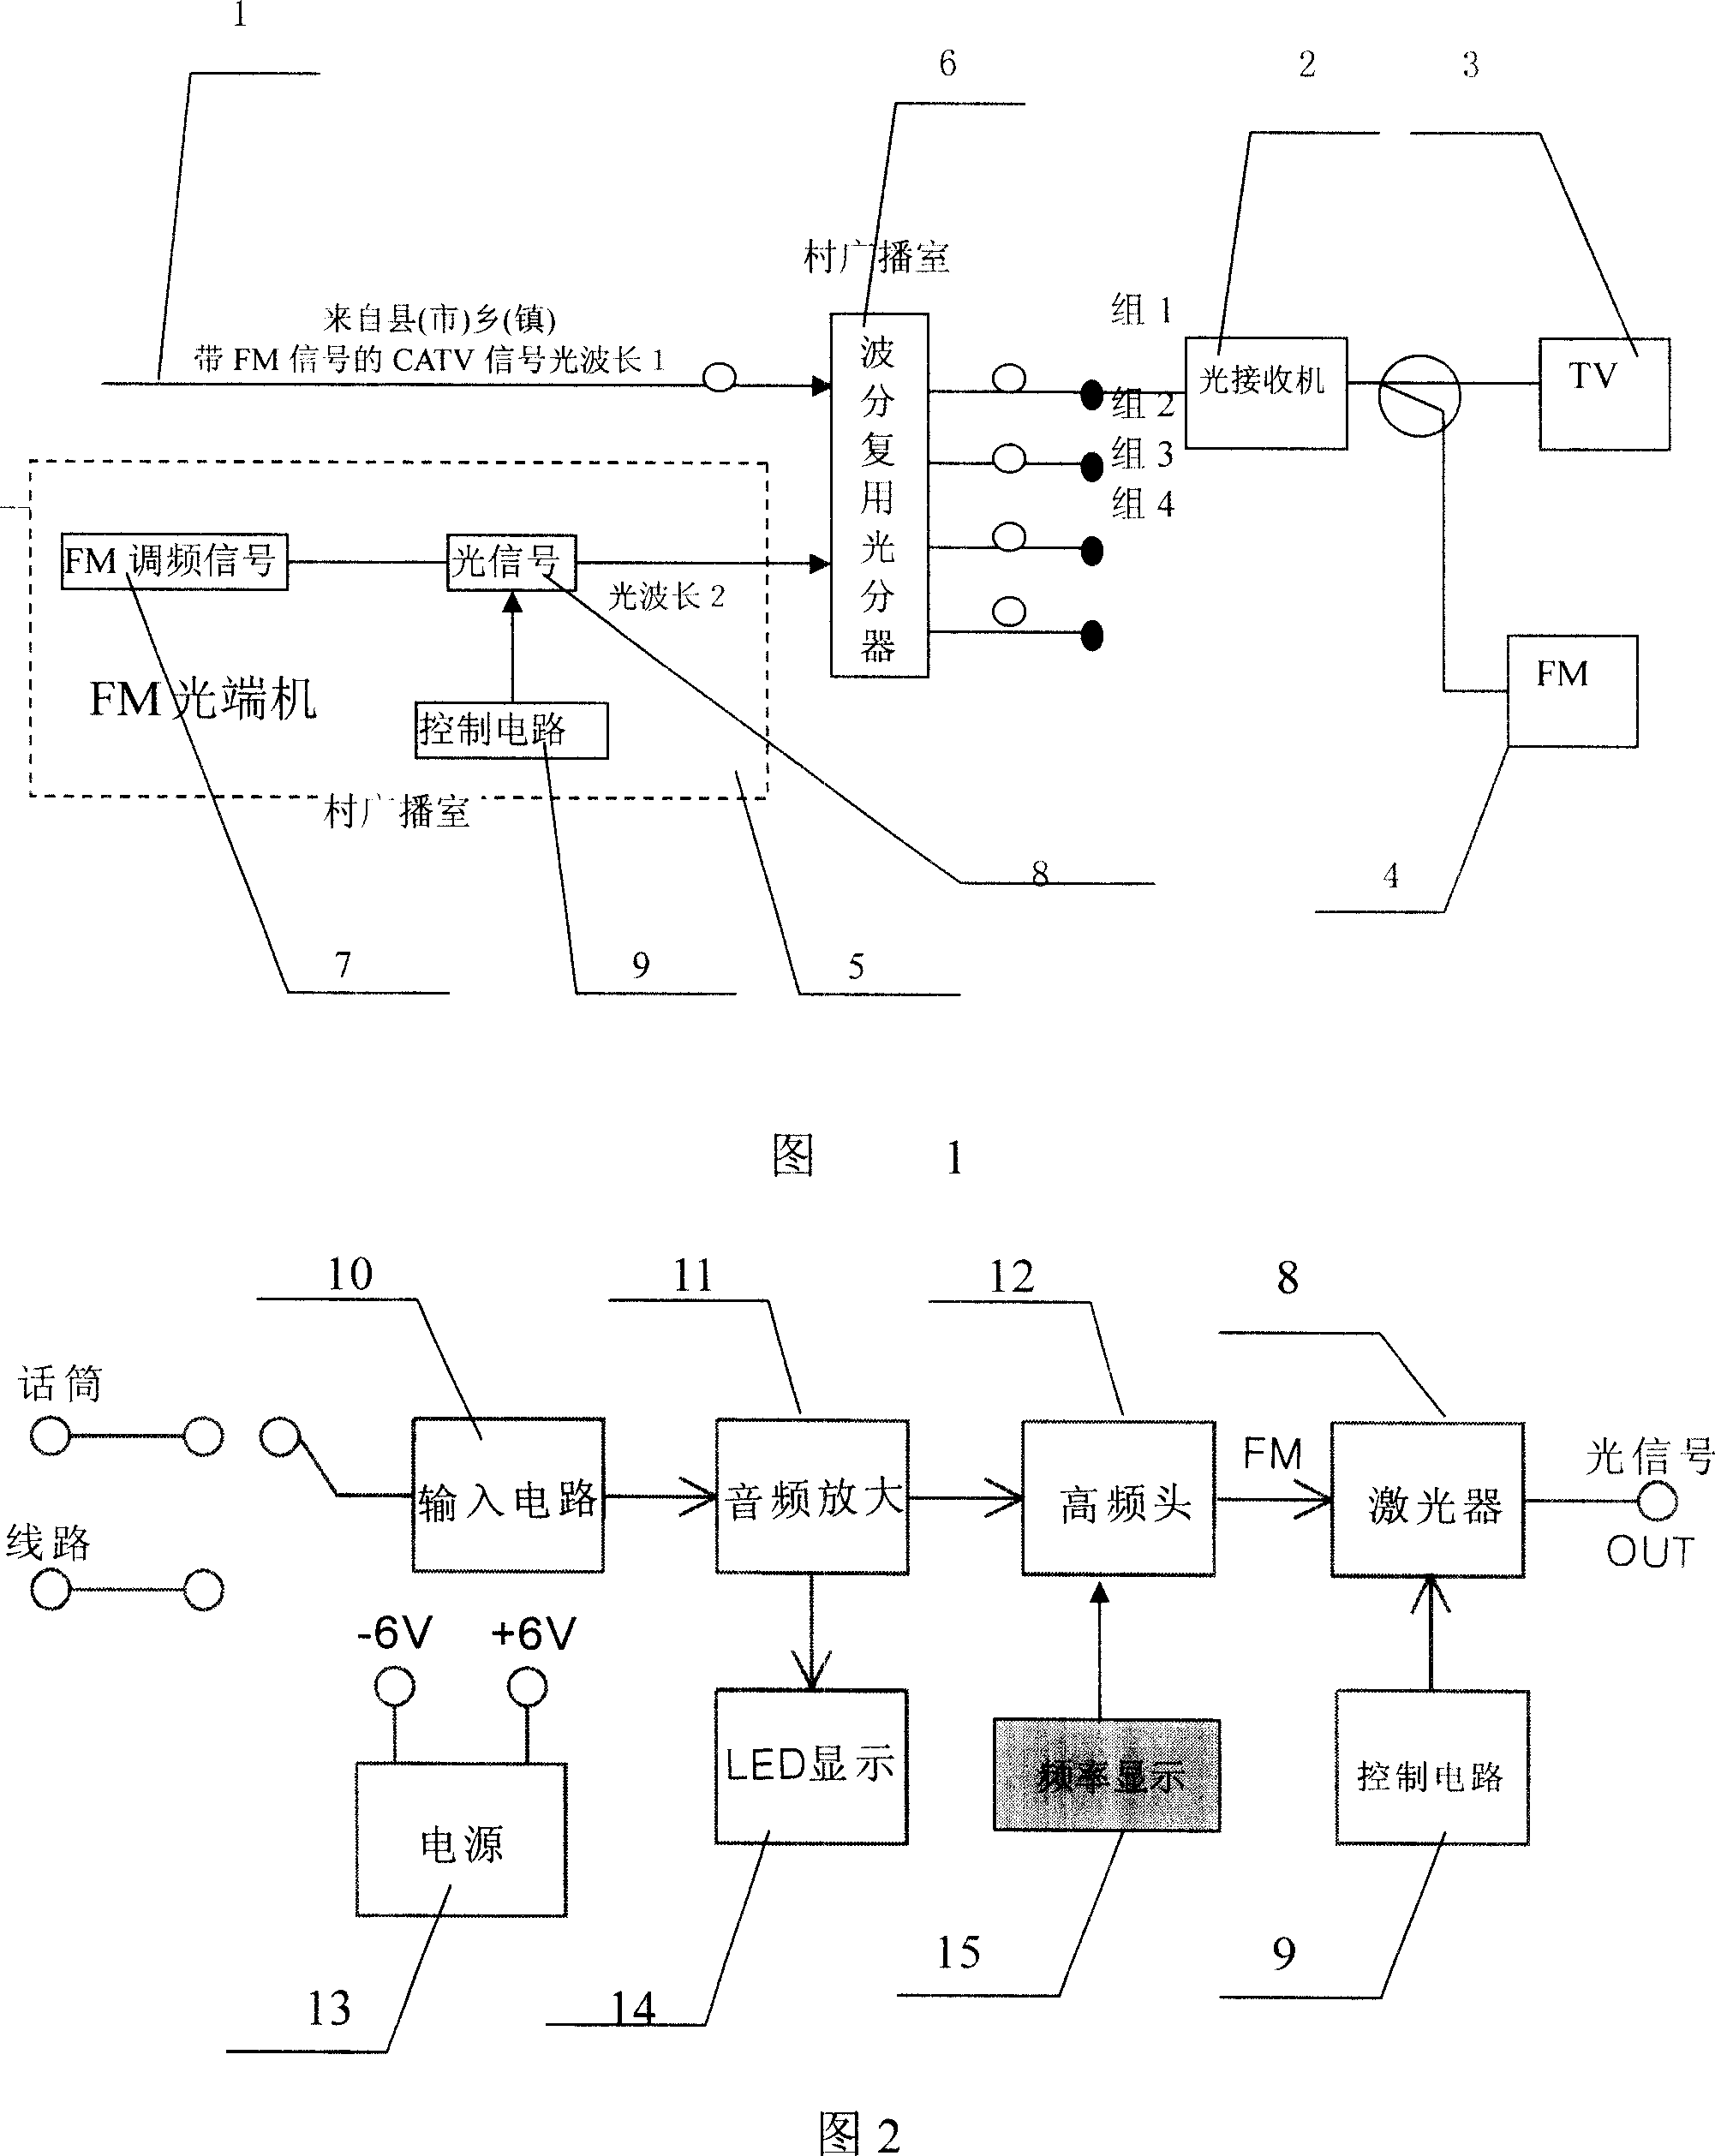 Rural broadcasting TV system based on FM optical termining machine and implementing method